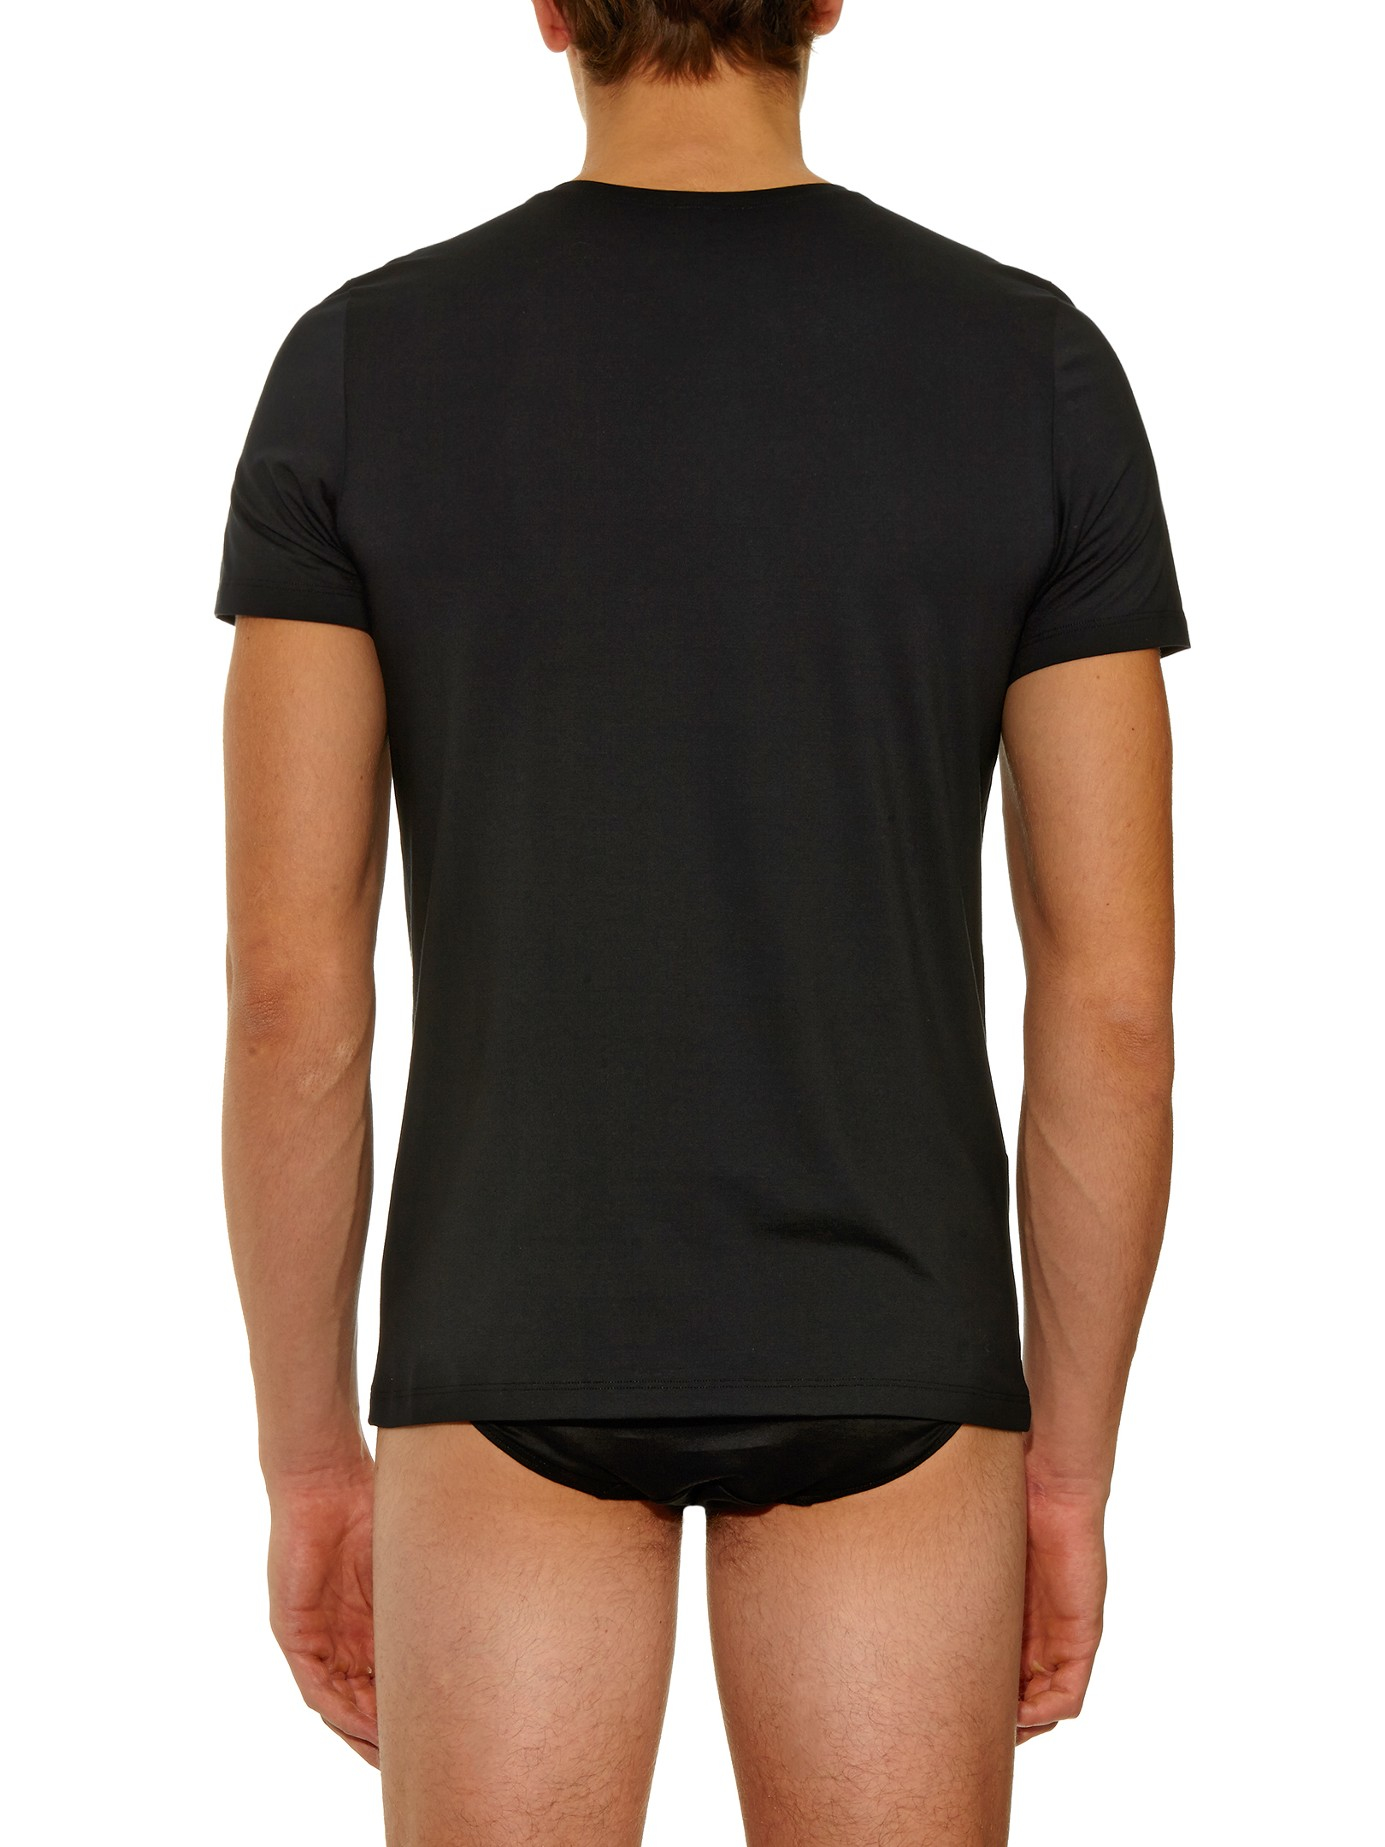 Lyst - Hanro Crew-Neck Cotton-Jersey T-Shirt in Black for Men